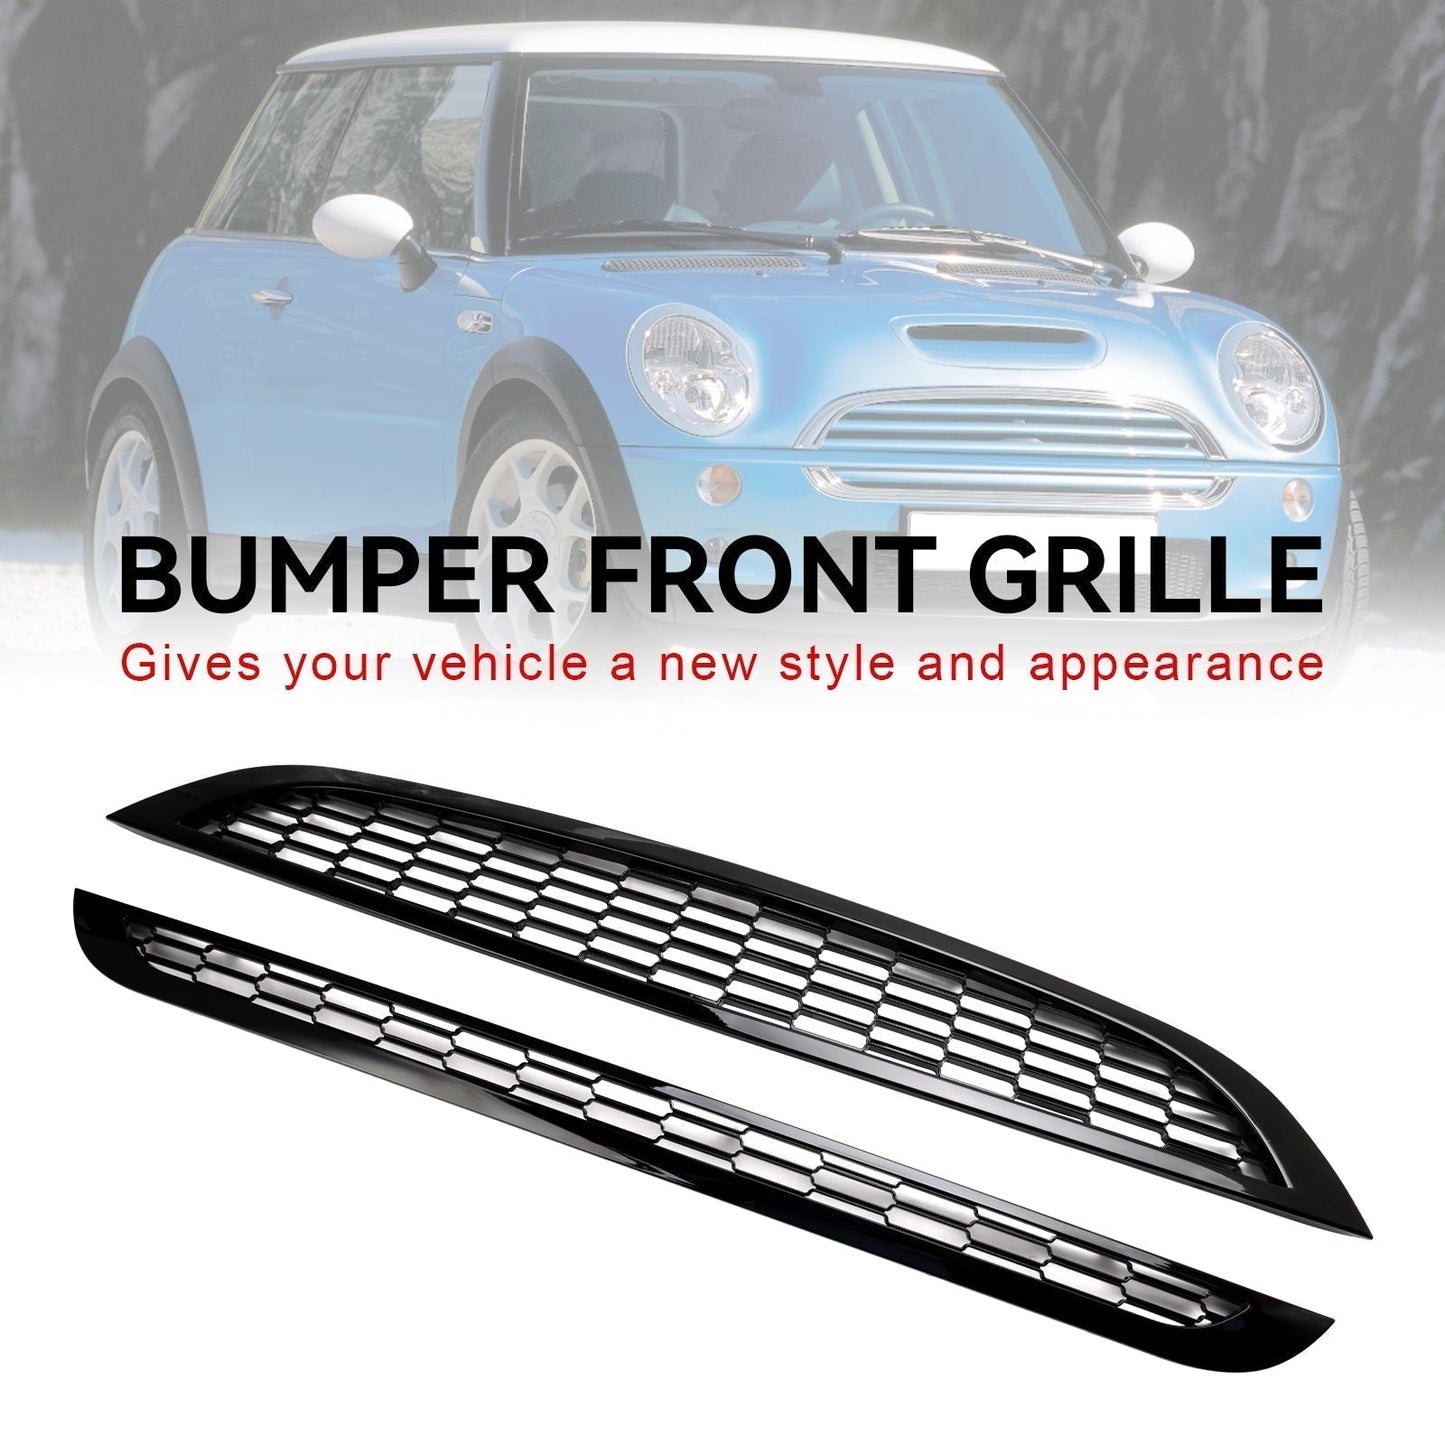 2002-2006 MINI R52 Convertible Honeycomb Mesh Front Grill Grille 2PCS